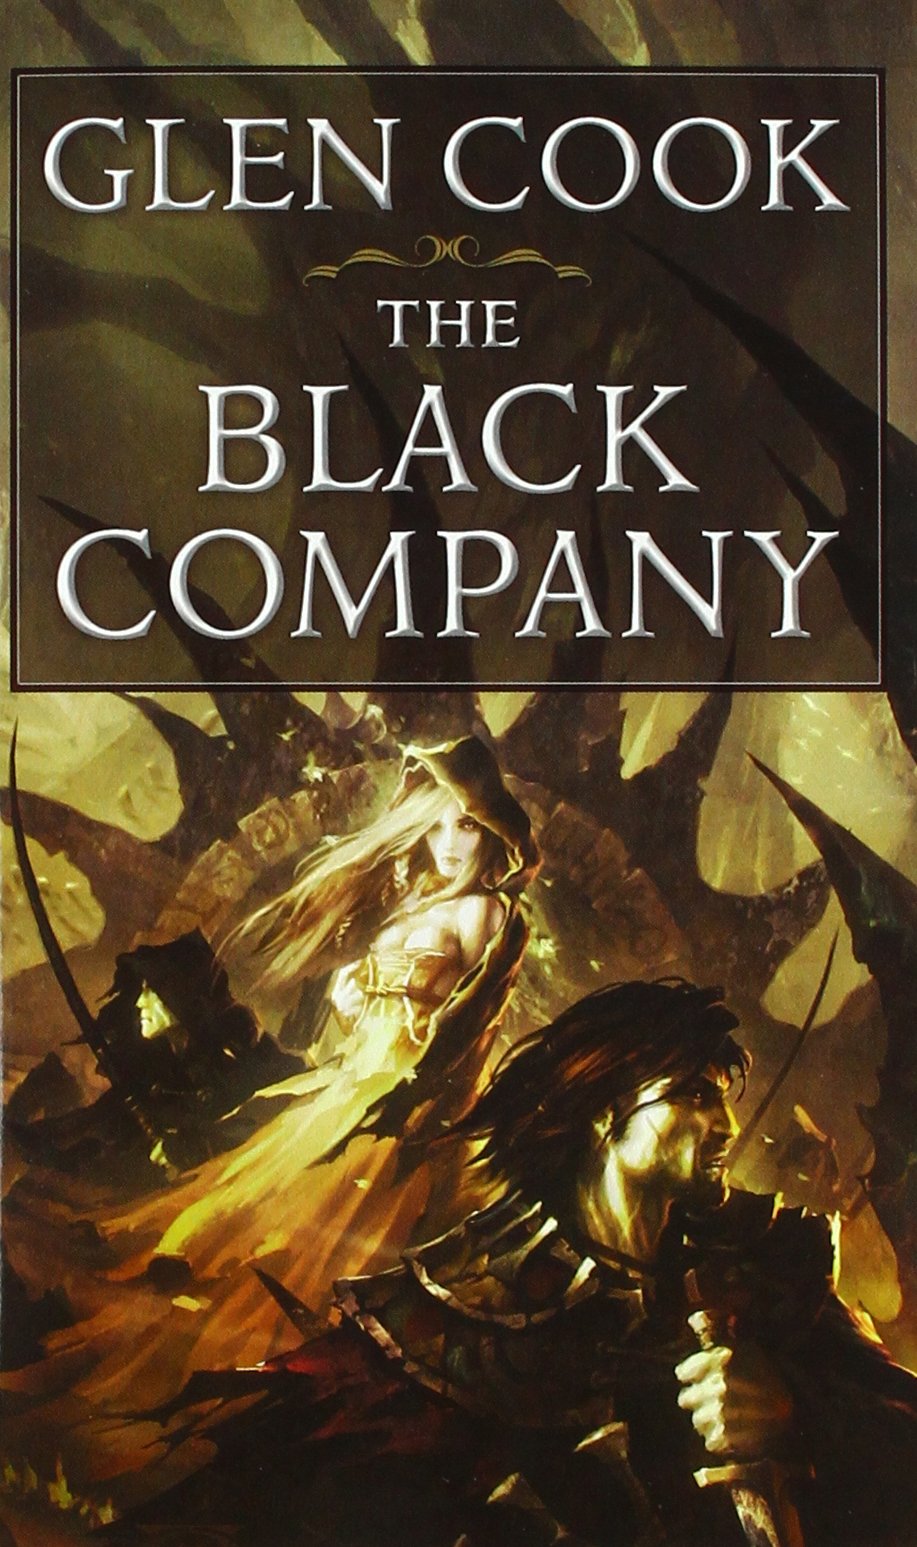 Chimera Review of The Black Company by Glen Cook